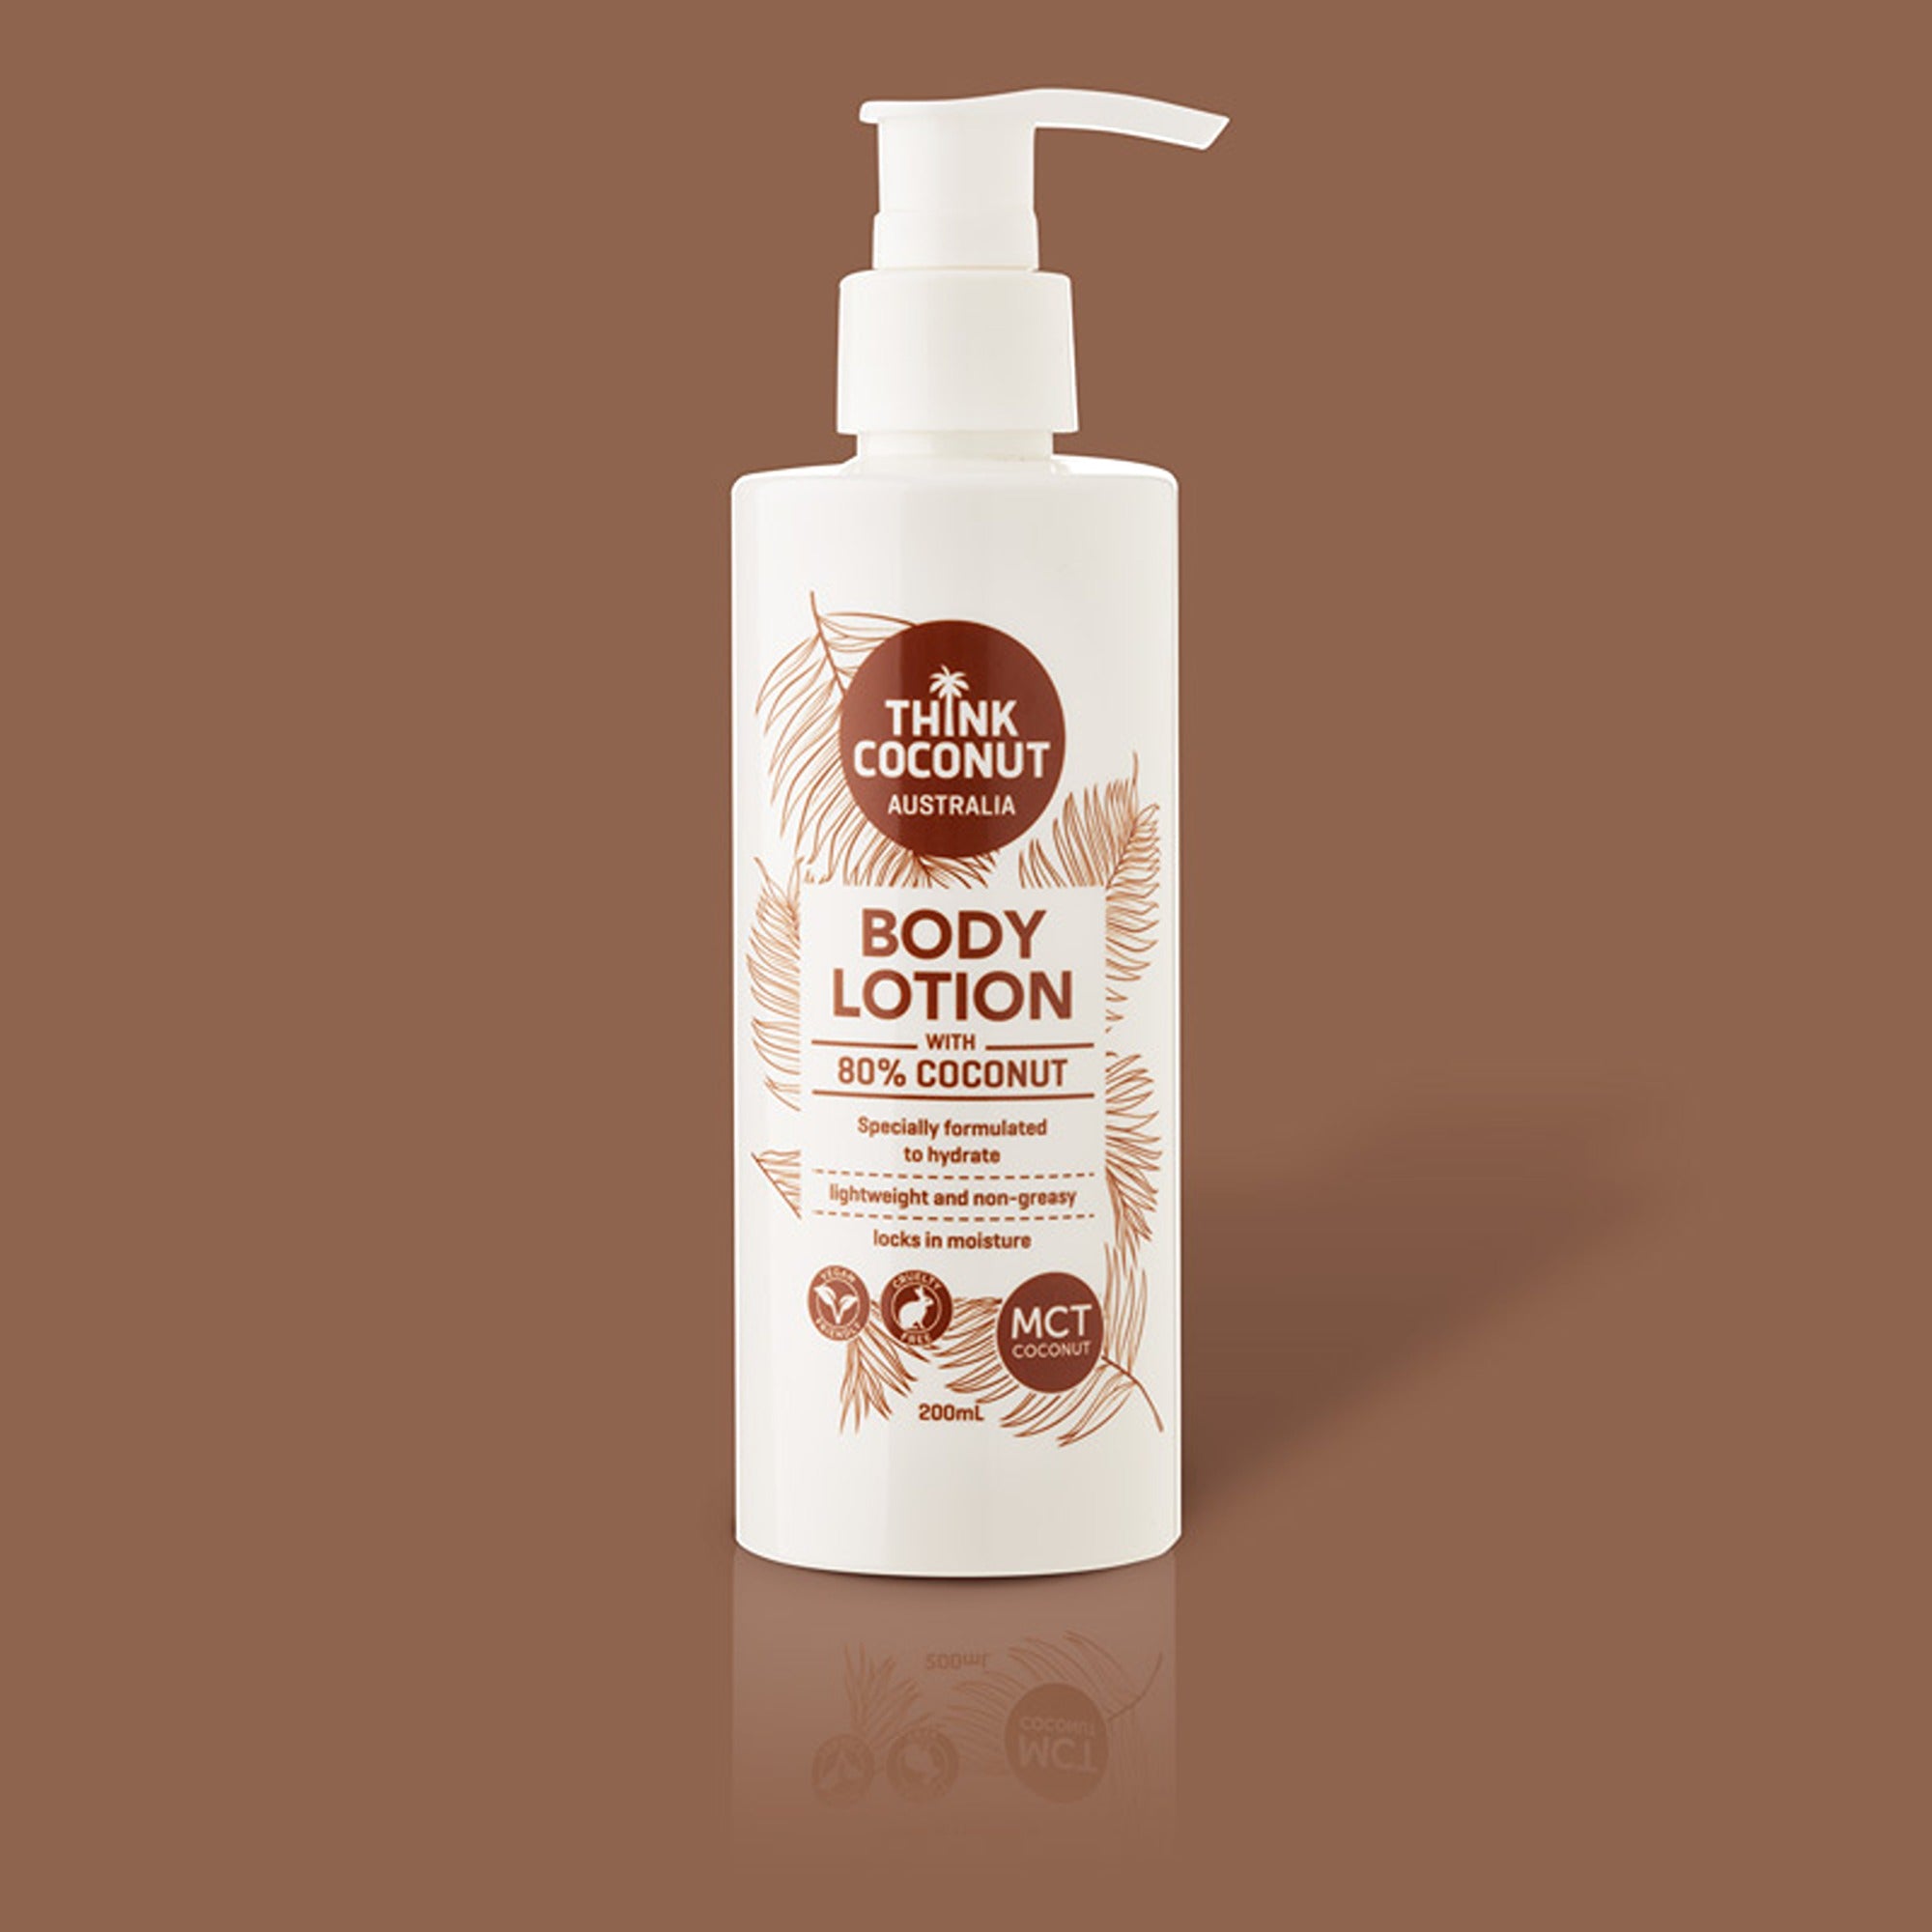 Think Coconut Body Lotion 200mL